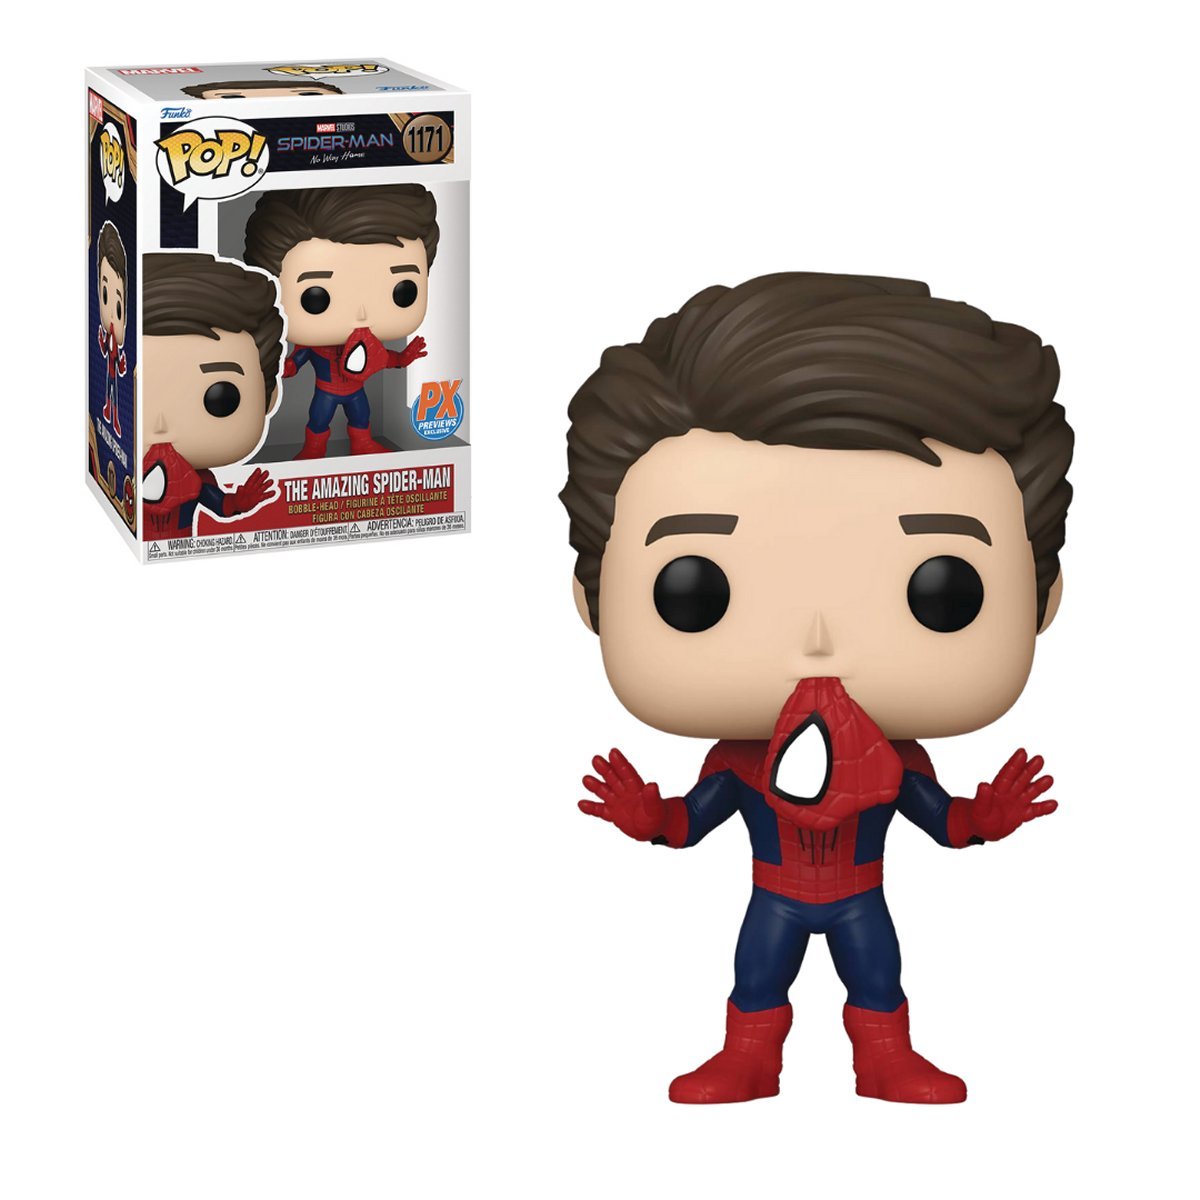 Amazing Spider-Man Funko Pop, displayed in and out of box (Funko)